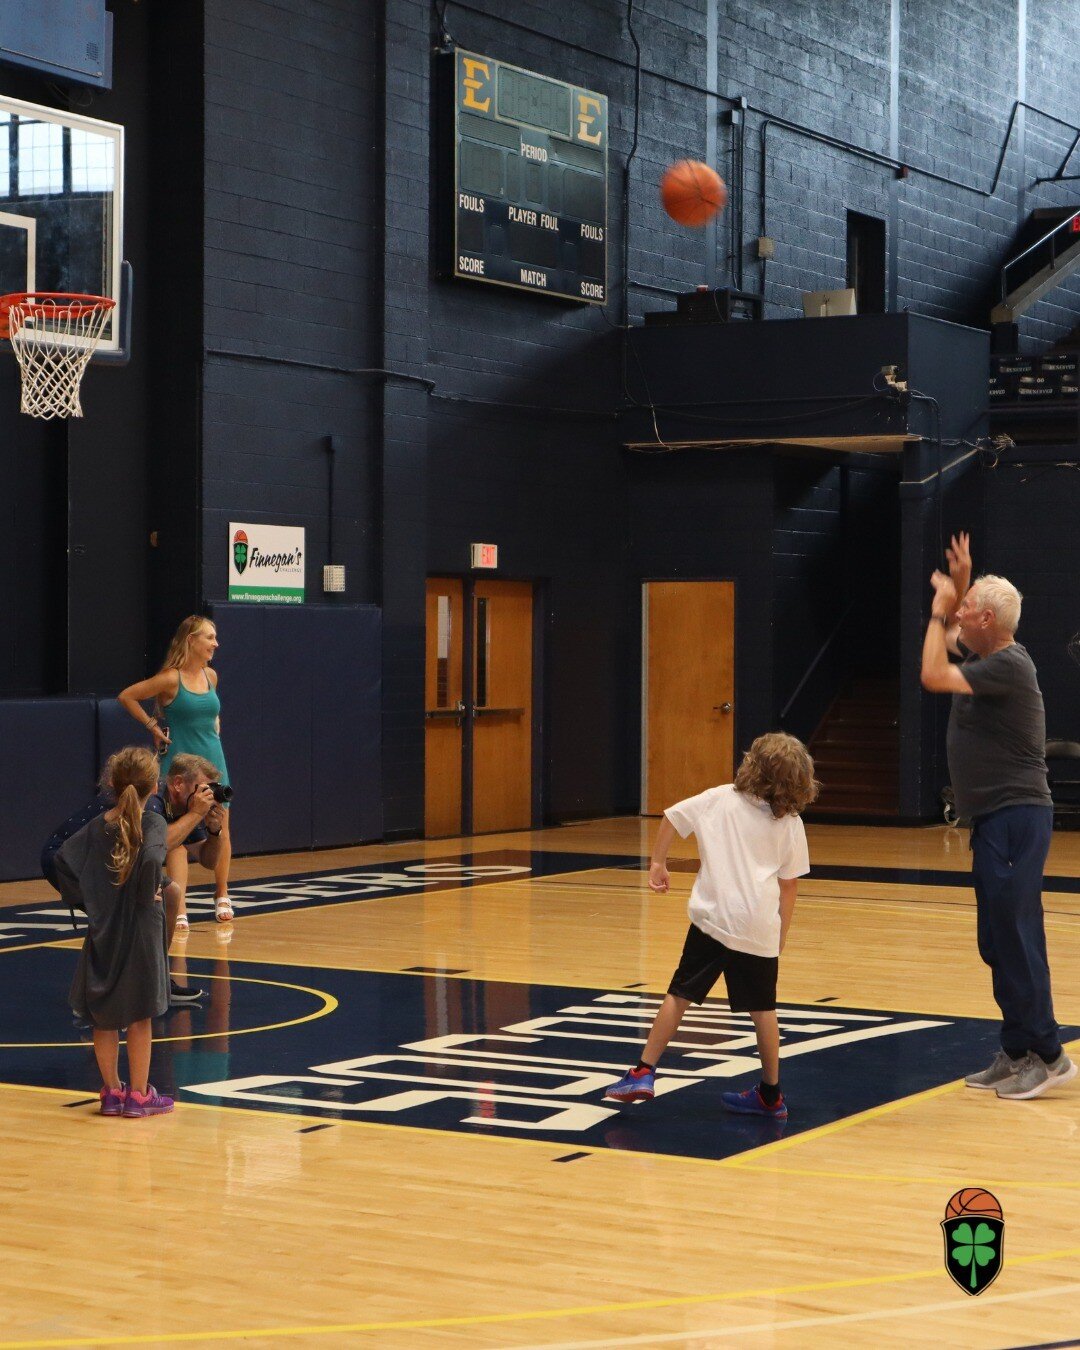 We&rsquo;re pretty confident that Doc nailed this free throw, but how cool is this snapshot?! 🏀

📸 Doc with Finnegan, Fonzy &amp; Claire 🍀

Folllow @finneganschallenge for more awesome free throws and challenges! 📲
.
.
.
.
 #etsu #etsutough #east